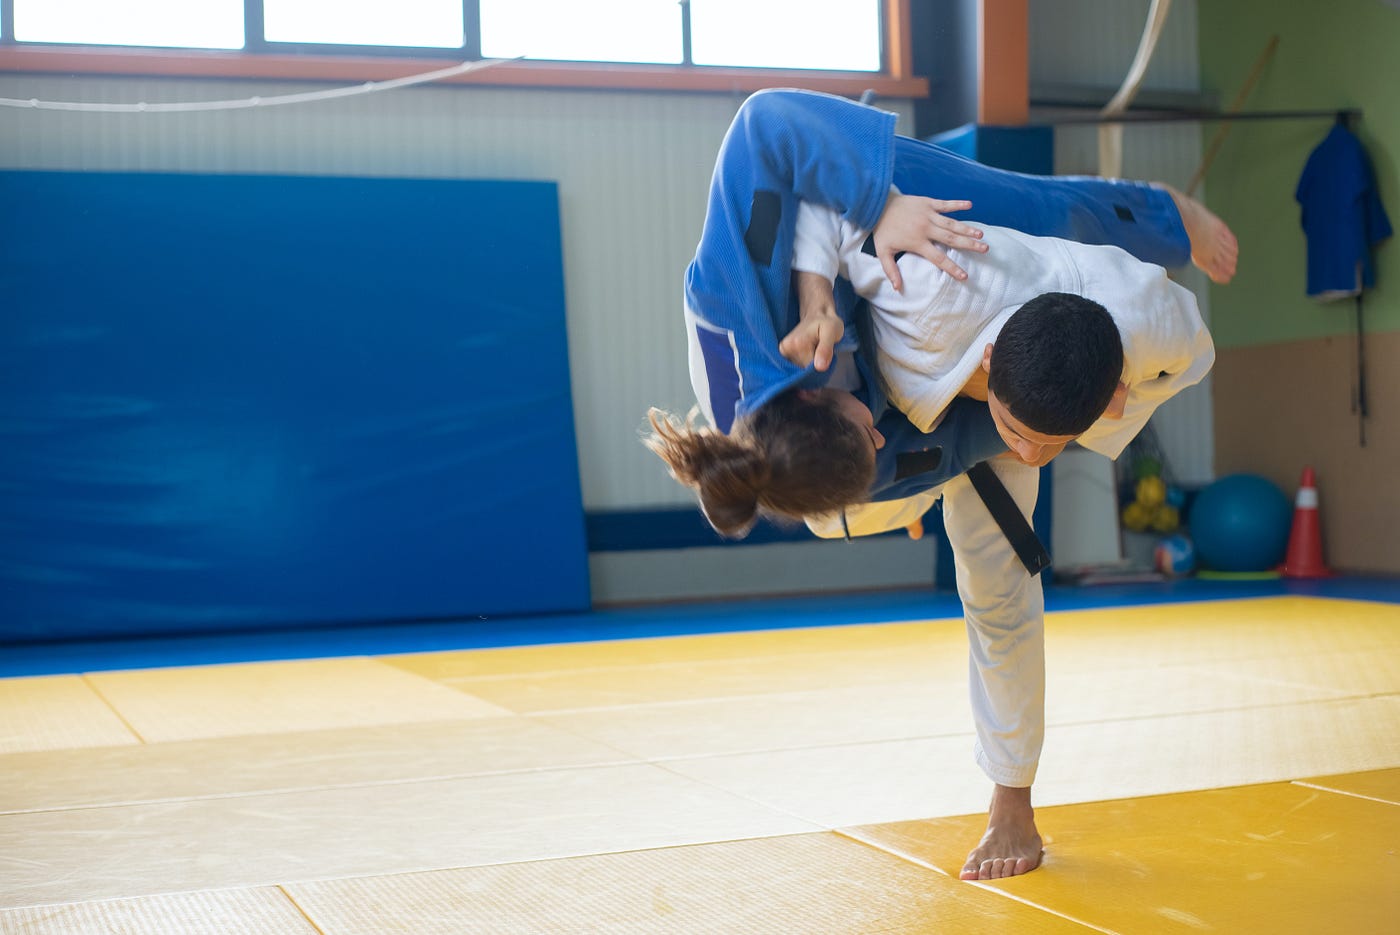 Machine Learning for Jiu Jitsu. Using pose estimation with mediapipe to…, by Lucas Soares